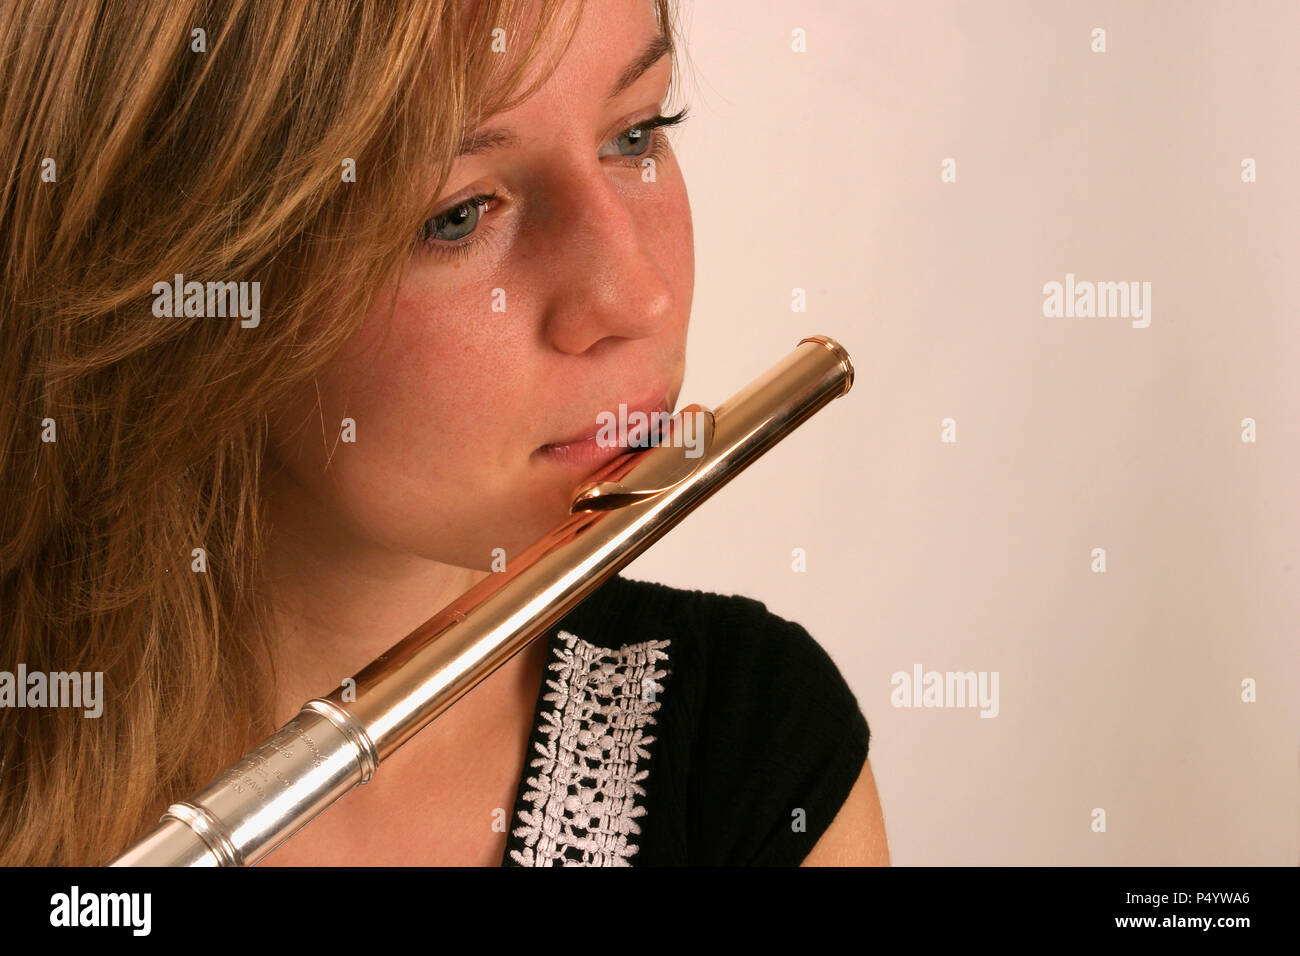 Page 3 - Lady Playing Flute High Resolution Stock Photography and Images -  Alamy